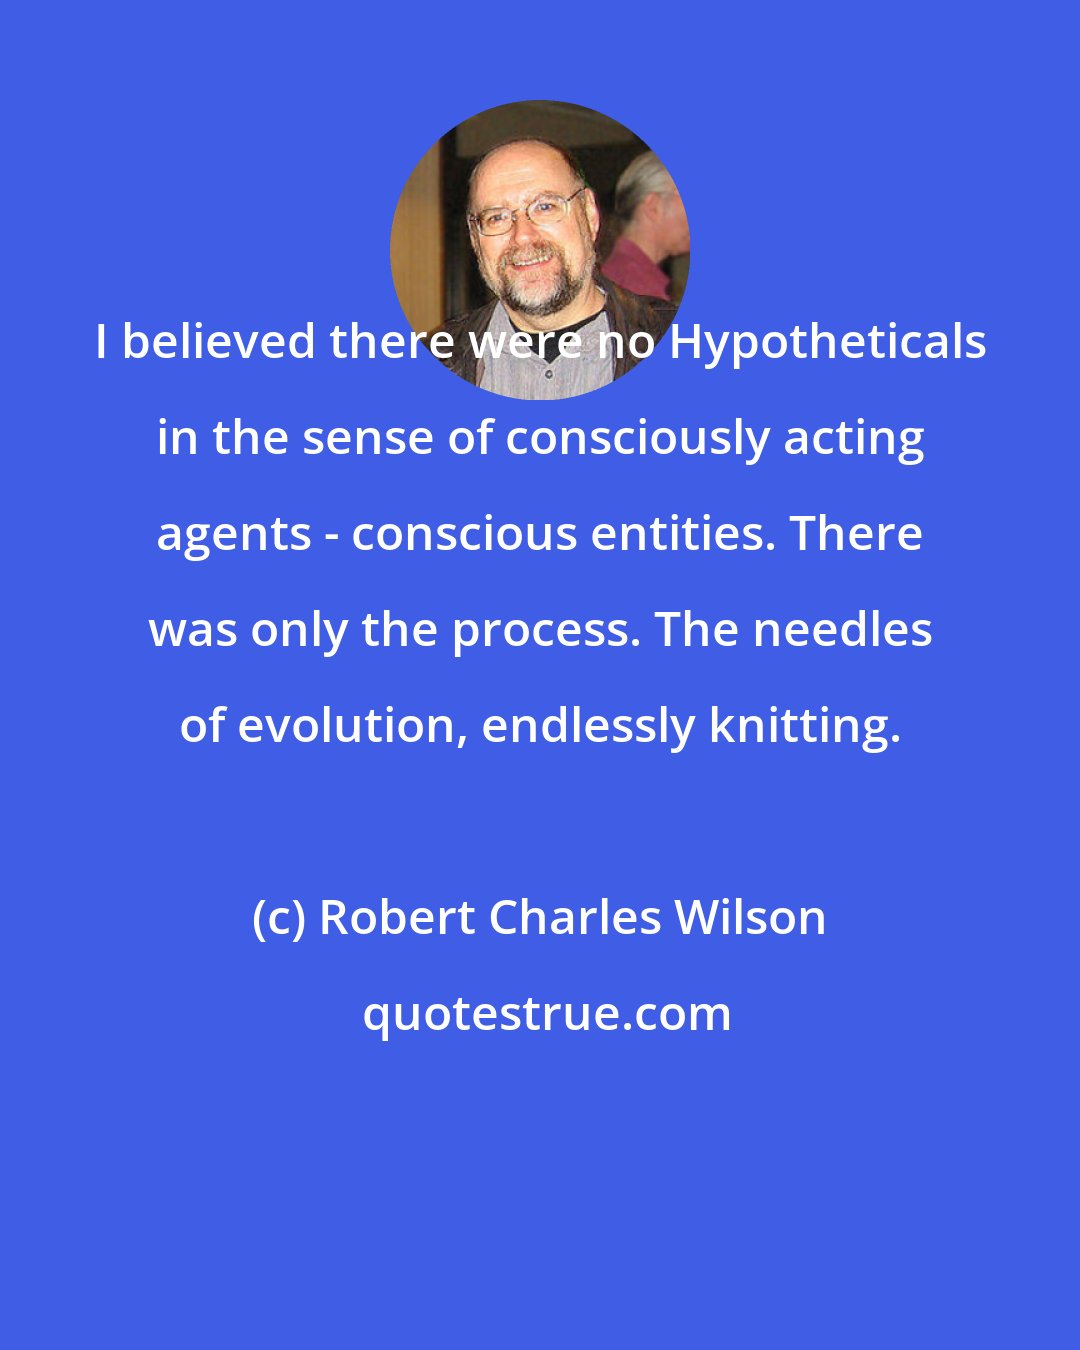 Robert Charles Wilson: I believed there were no Hypotheticals in the sense of consciously acting agents - conscious entities. There was only the process. The needles of evolution, endlessly knitting.